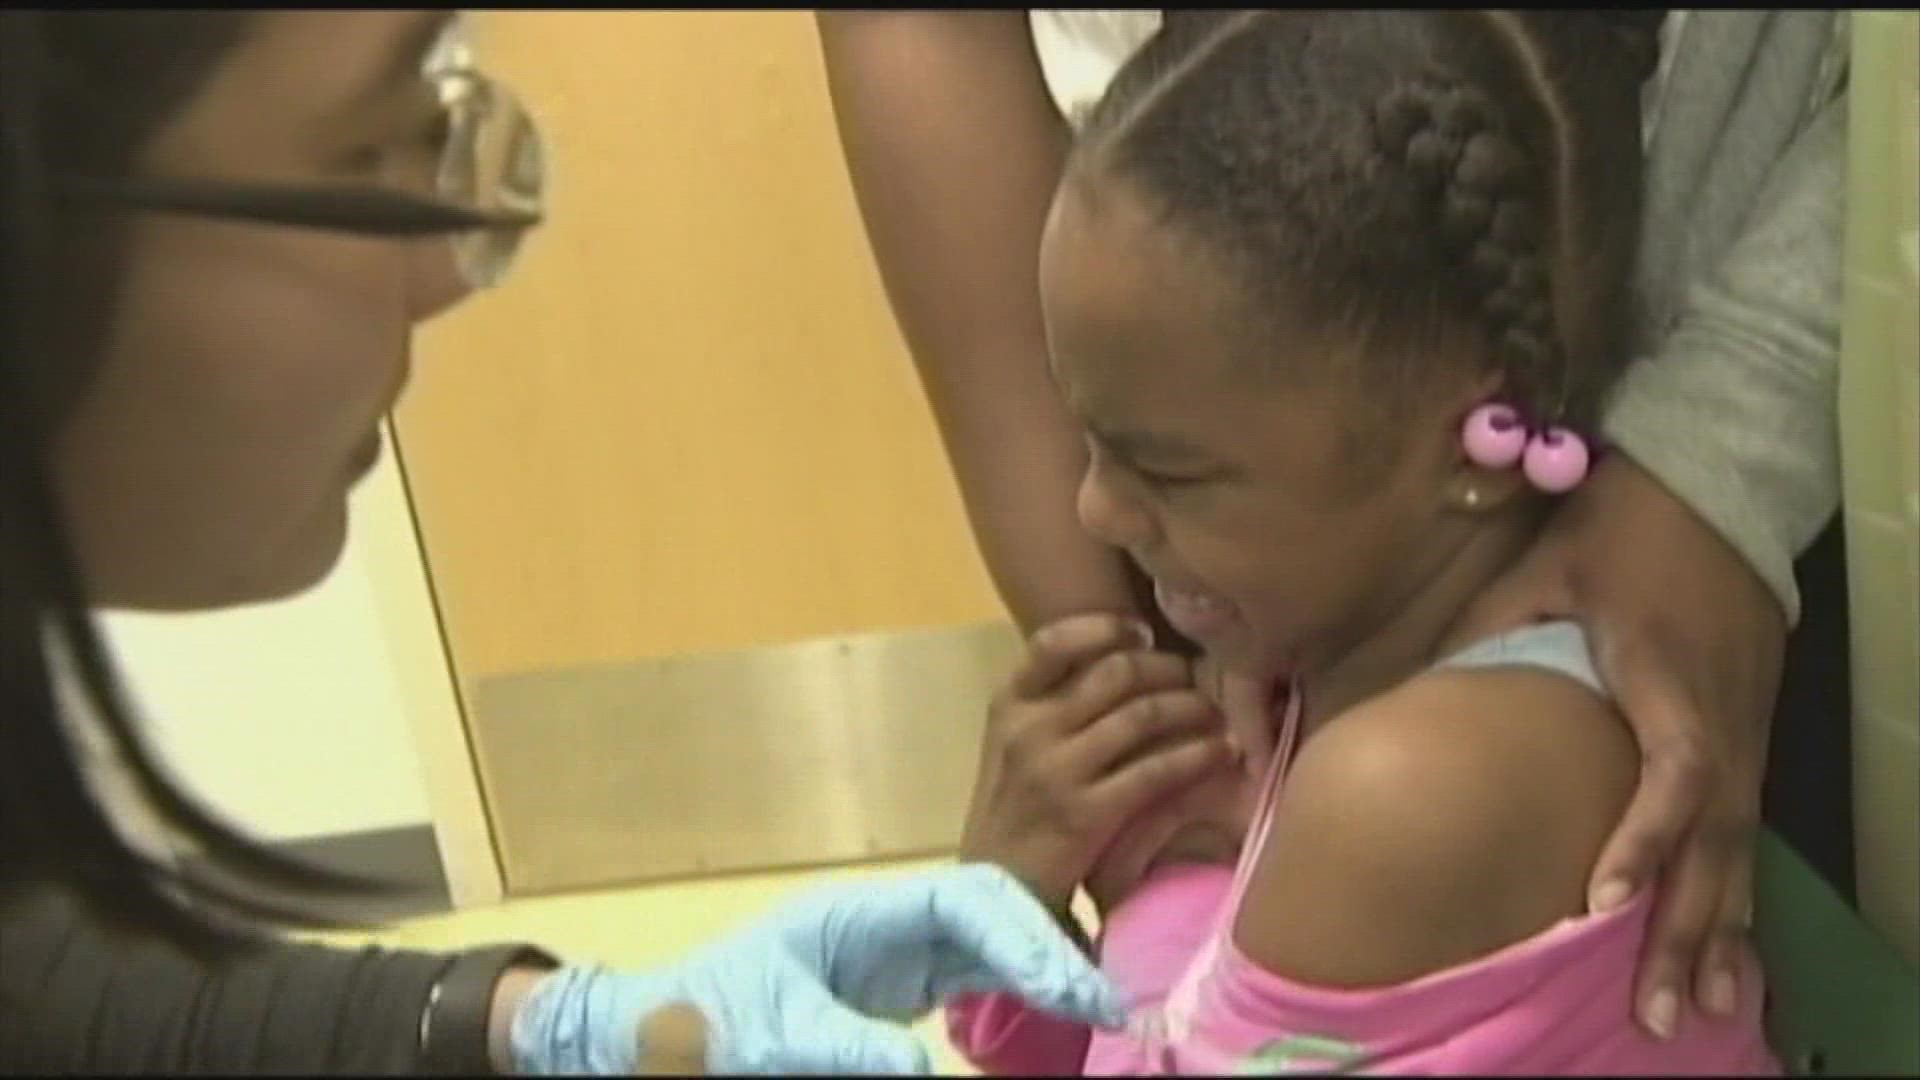 For Flu Vaccine Dosing in Kids, Two Is Better Than One